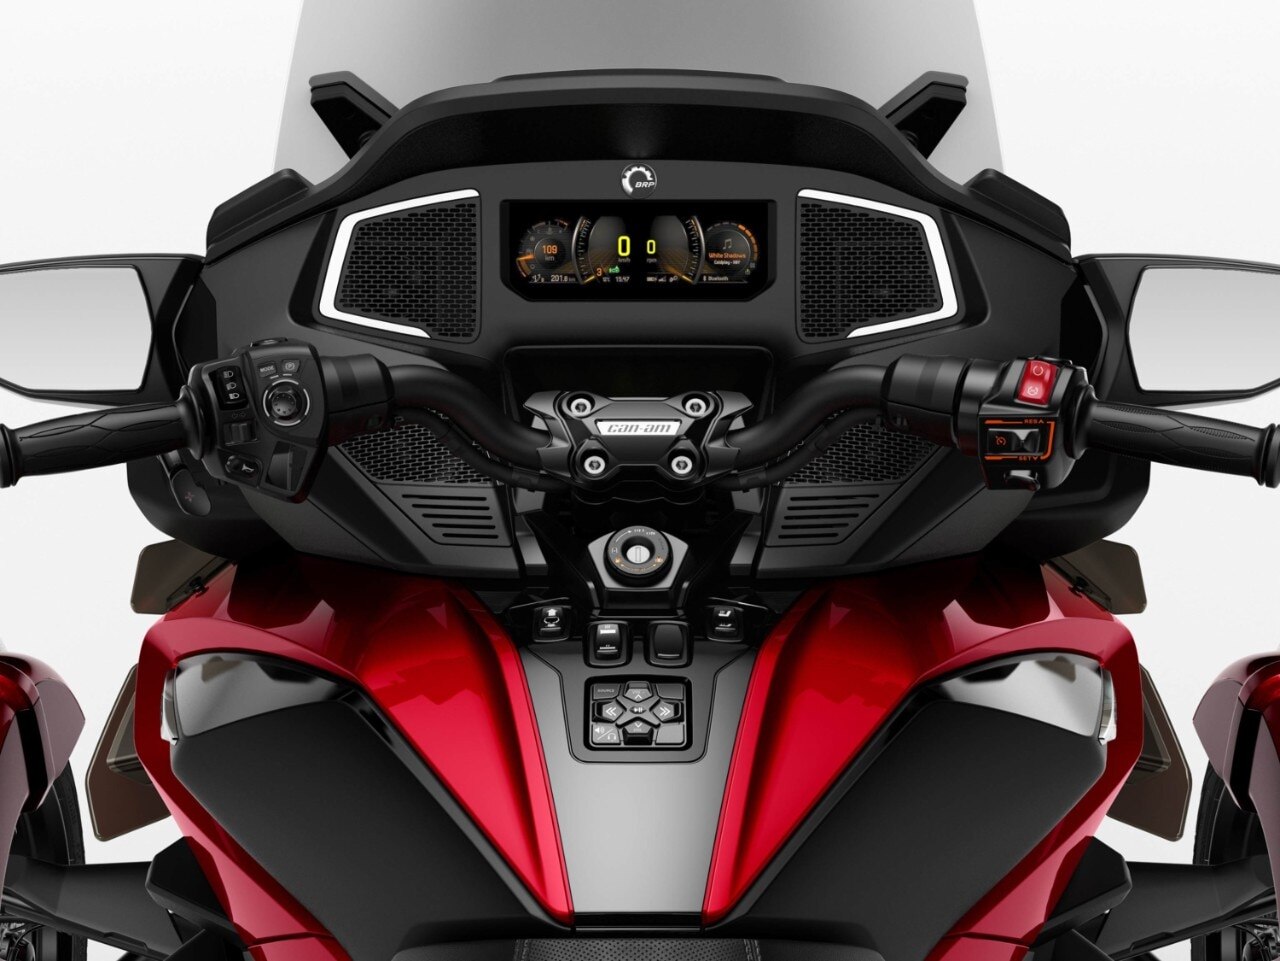 Can-Am Spyder's 7.8" wide LCD color display with vehicle controls